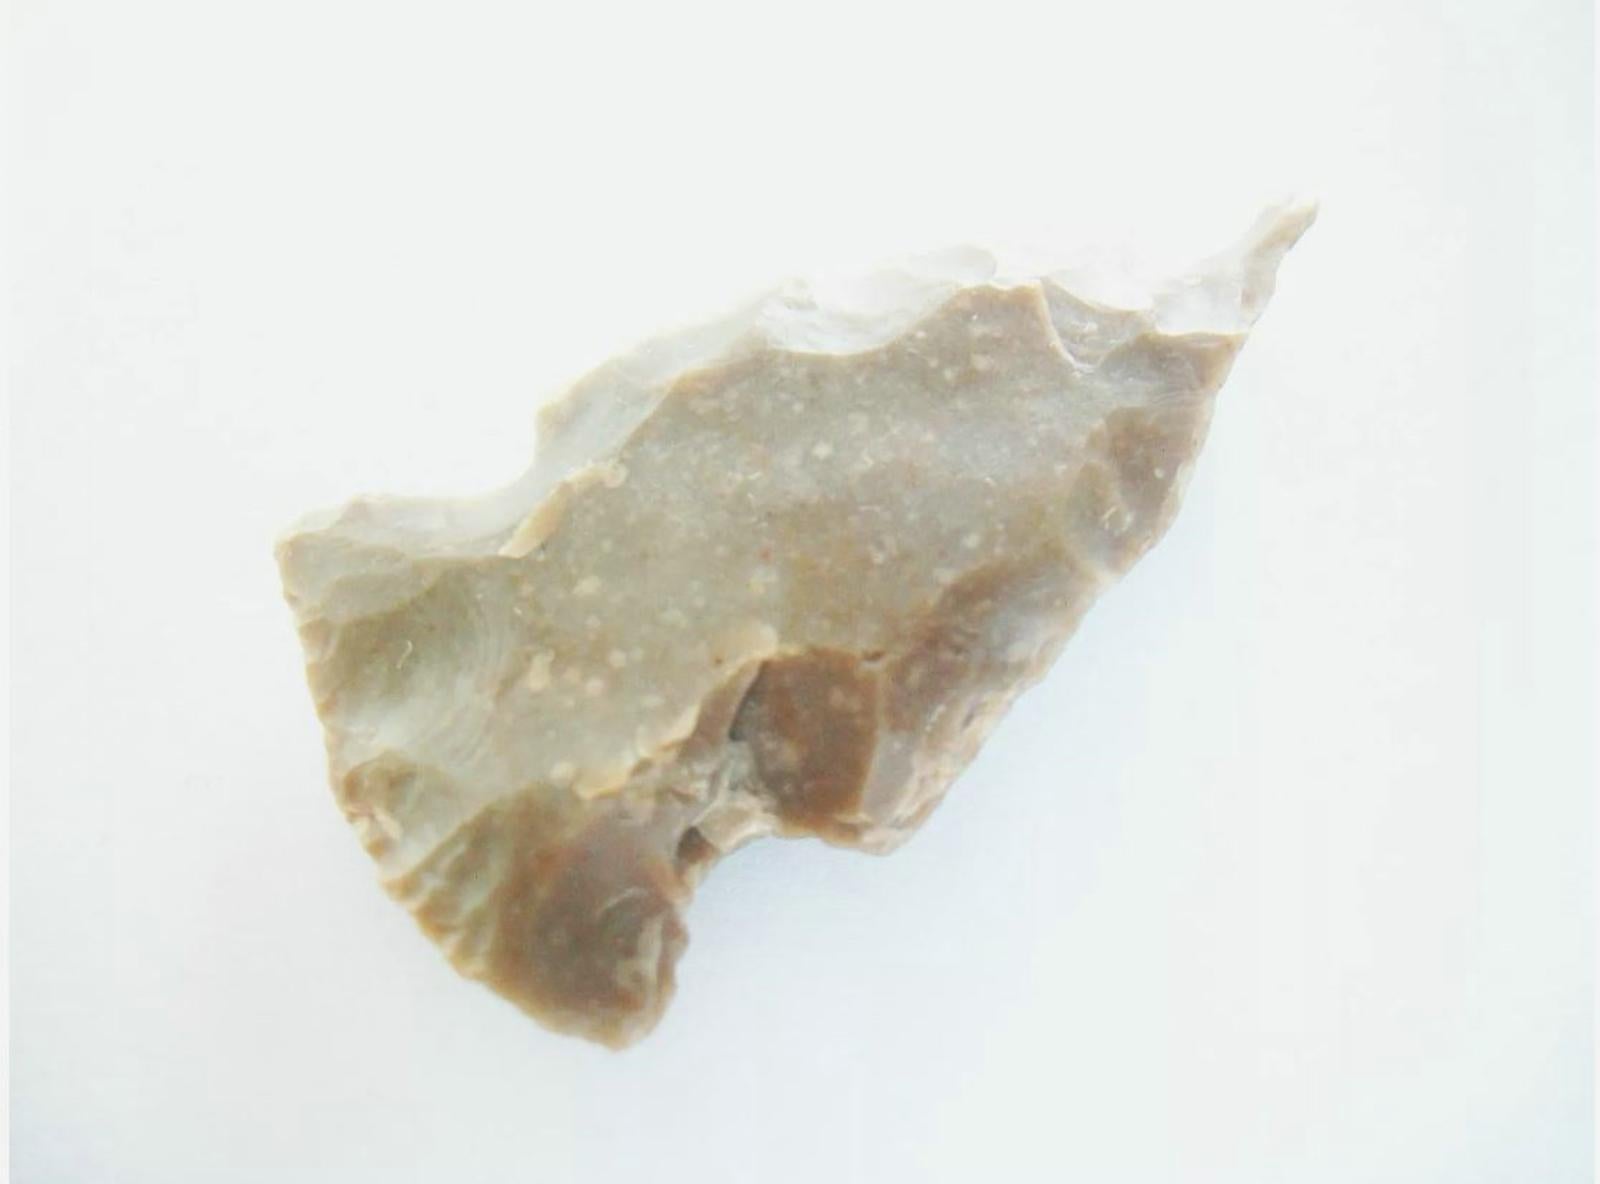 ARROWHEAD - Canadian First Nations Stone Projectile/Pendant - 2